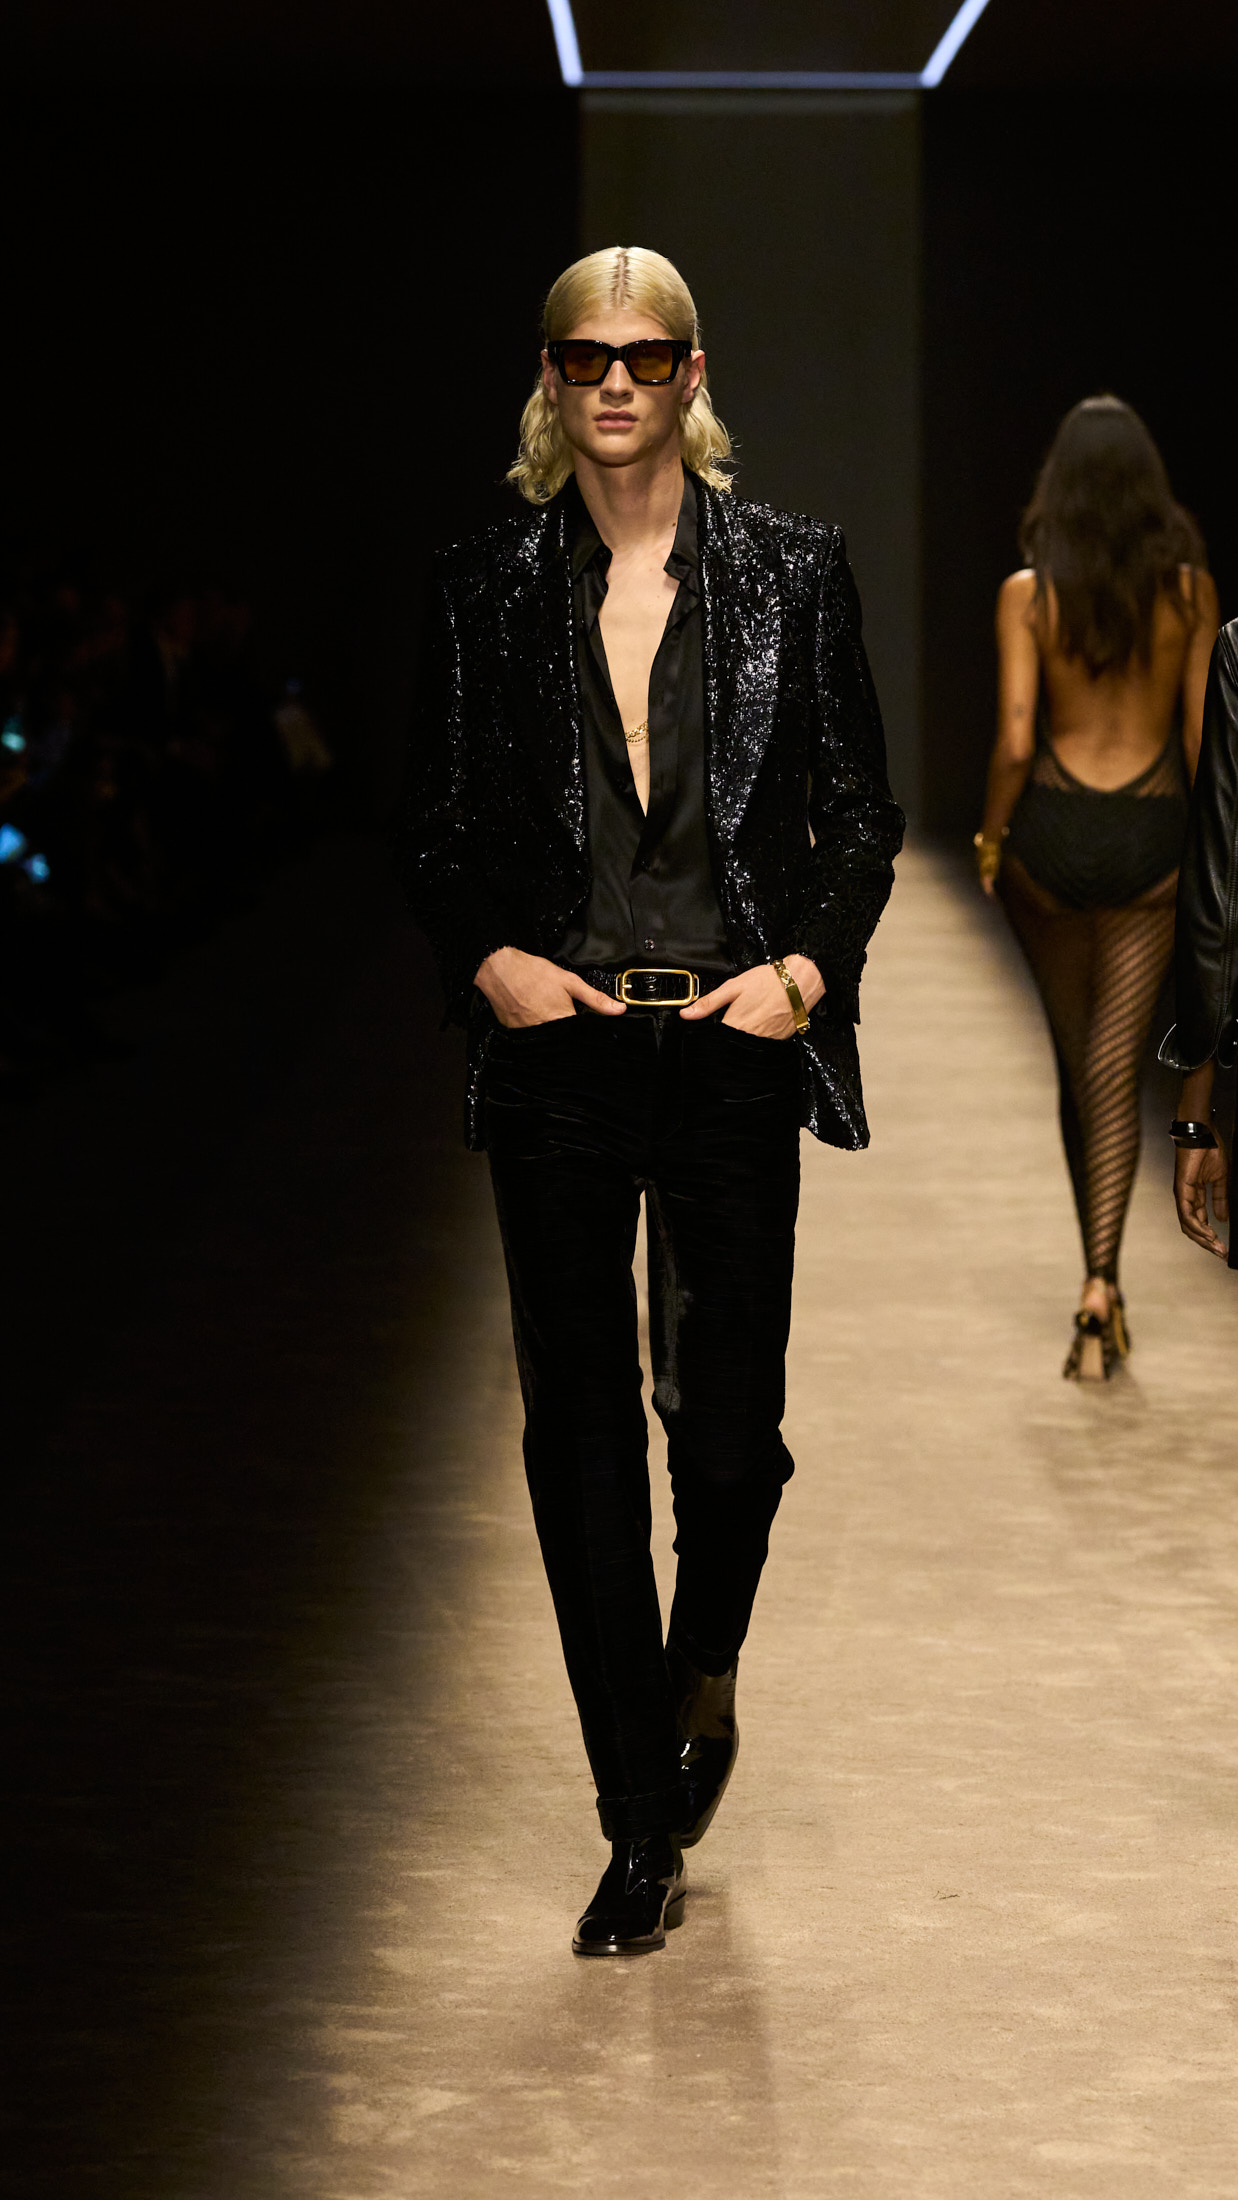 Peter Hawkings' debut in TOM FORD: a return to the roots - HIGHXTAR.